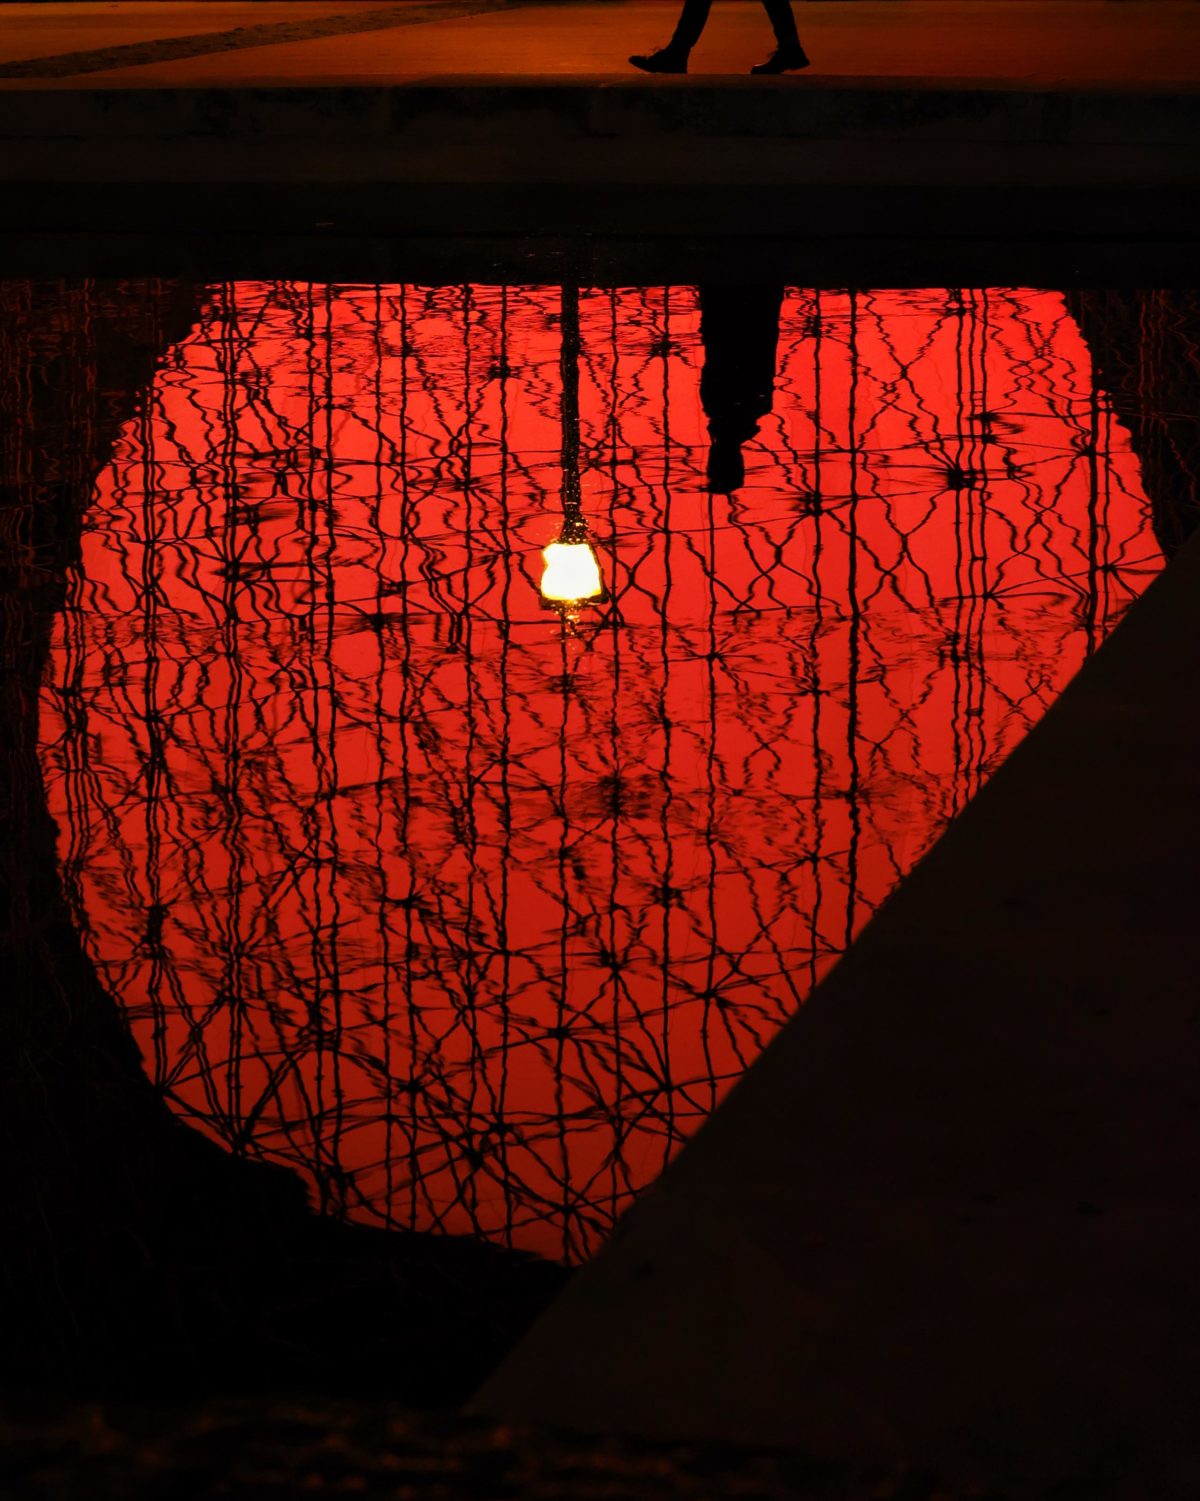 Tierra/Earth. A luminous red sphere caged inside a structure